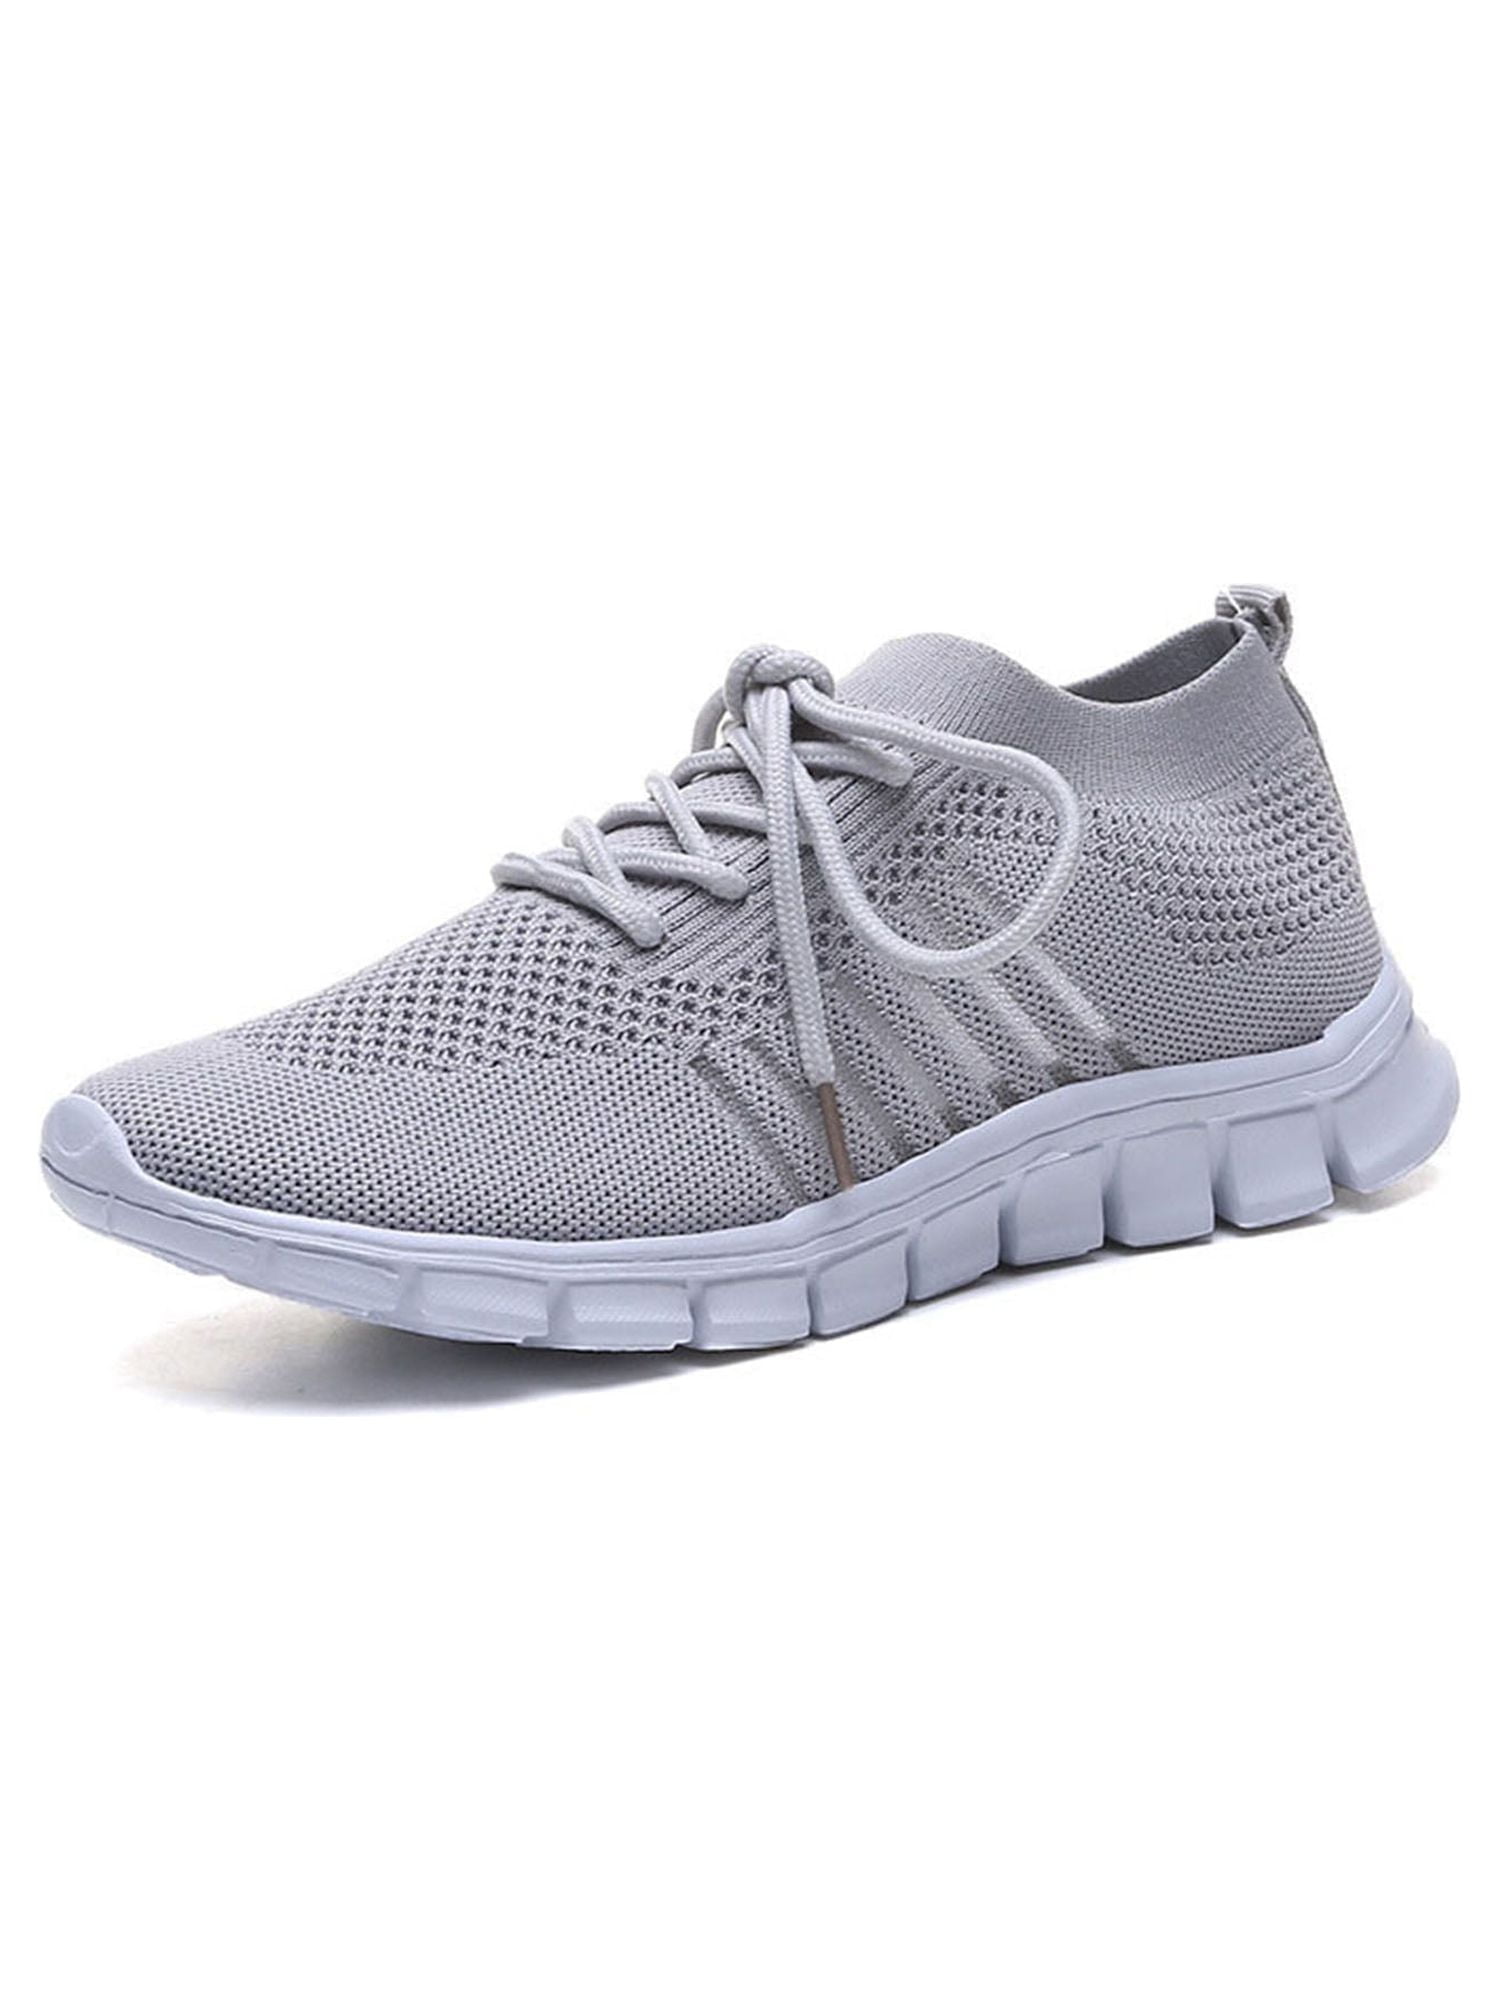 NEW Lightweight Running Shoes for Women Mesh Lace up Sneakers ...